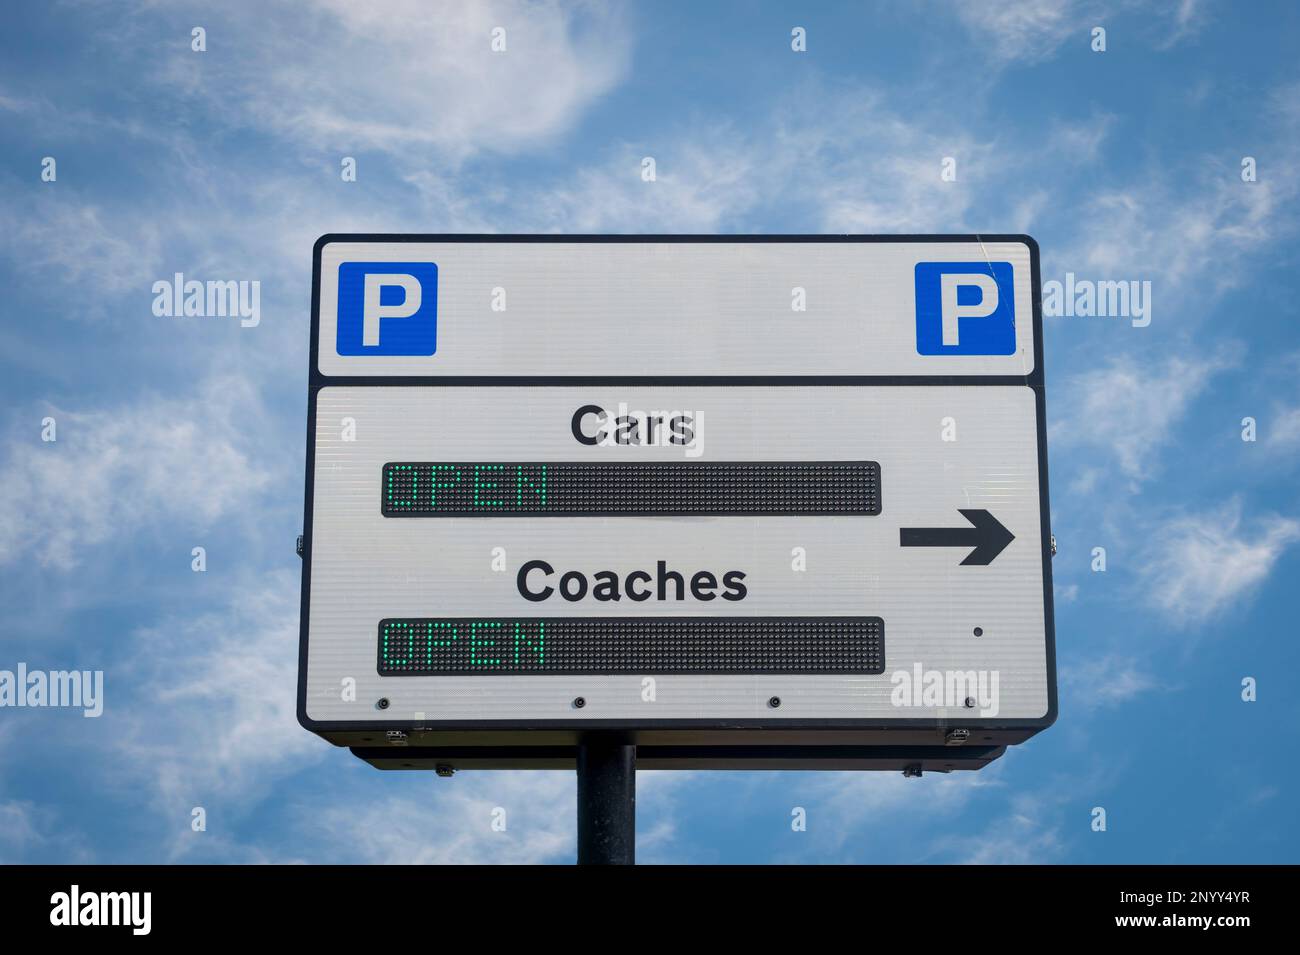 LED car park sign for cars and coaches. Stock Photo